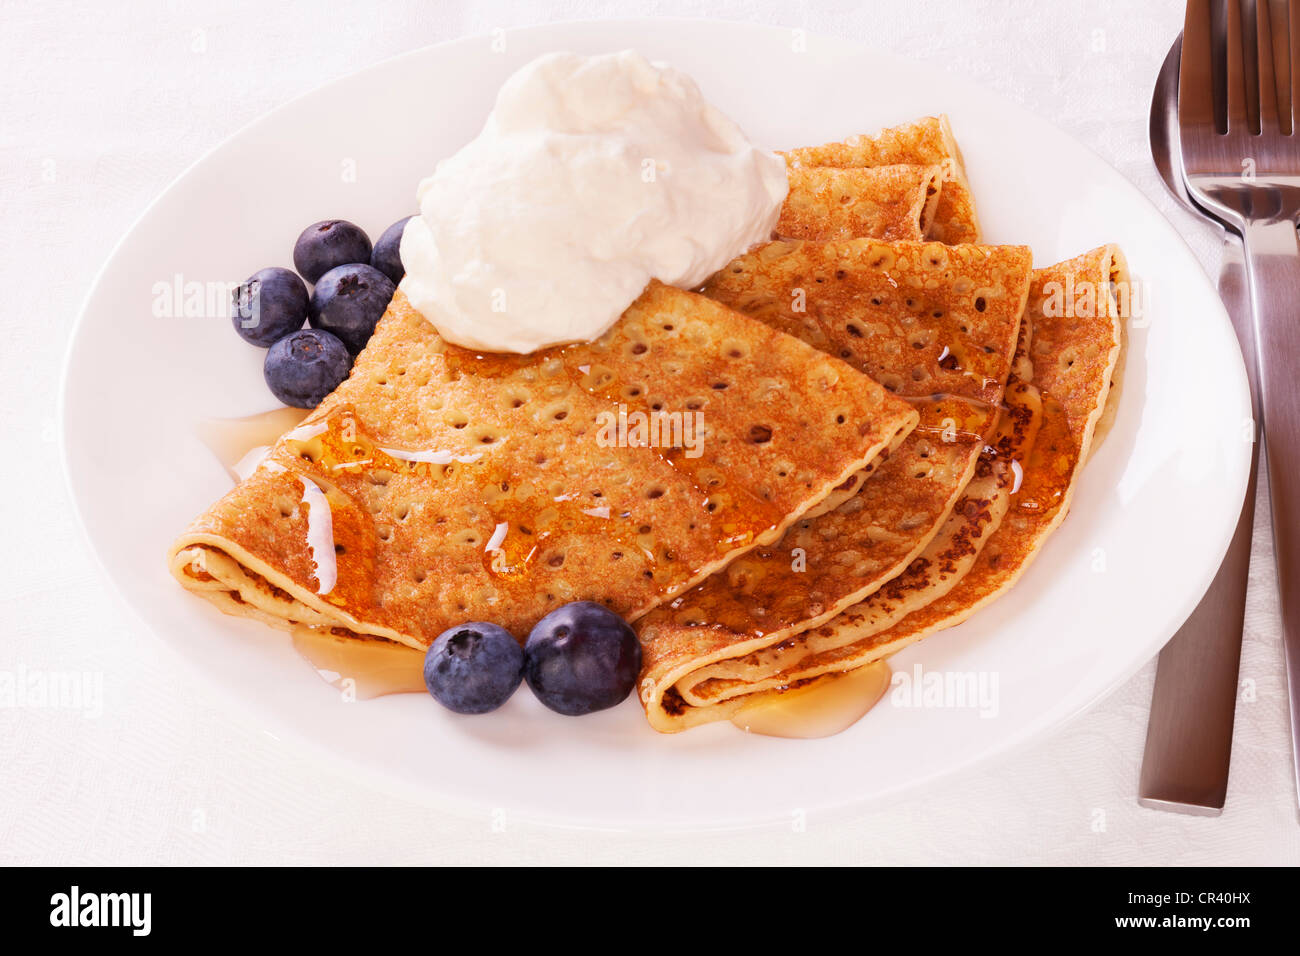 Delicious pancakes or crepes with blueberries, maple syrup and a dollop of whipped cream. Stock Photo